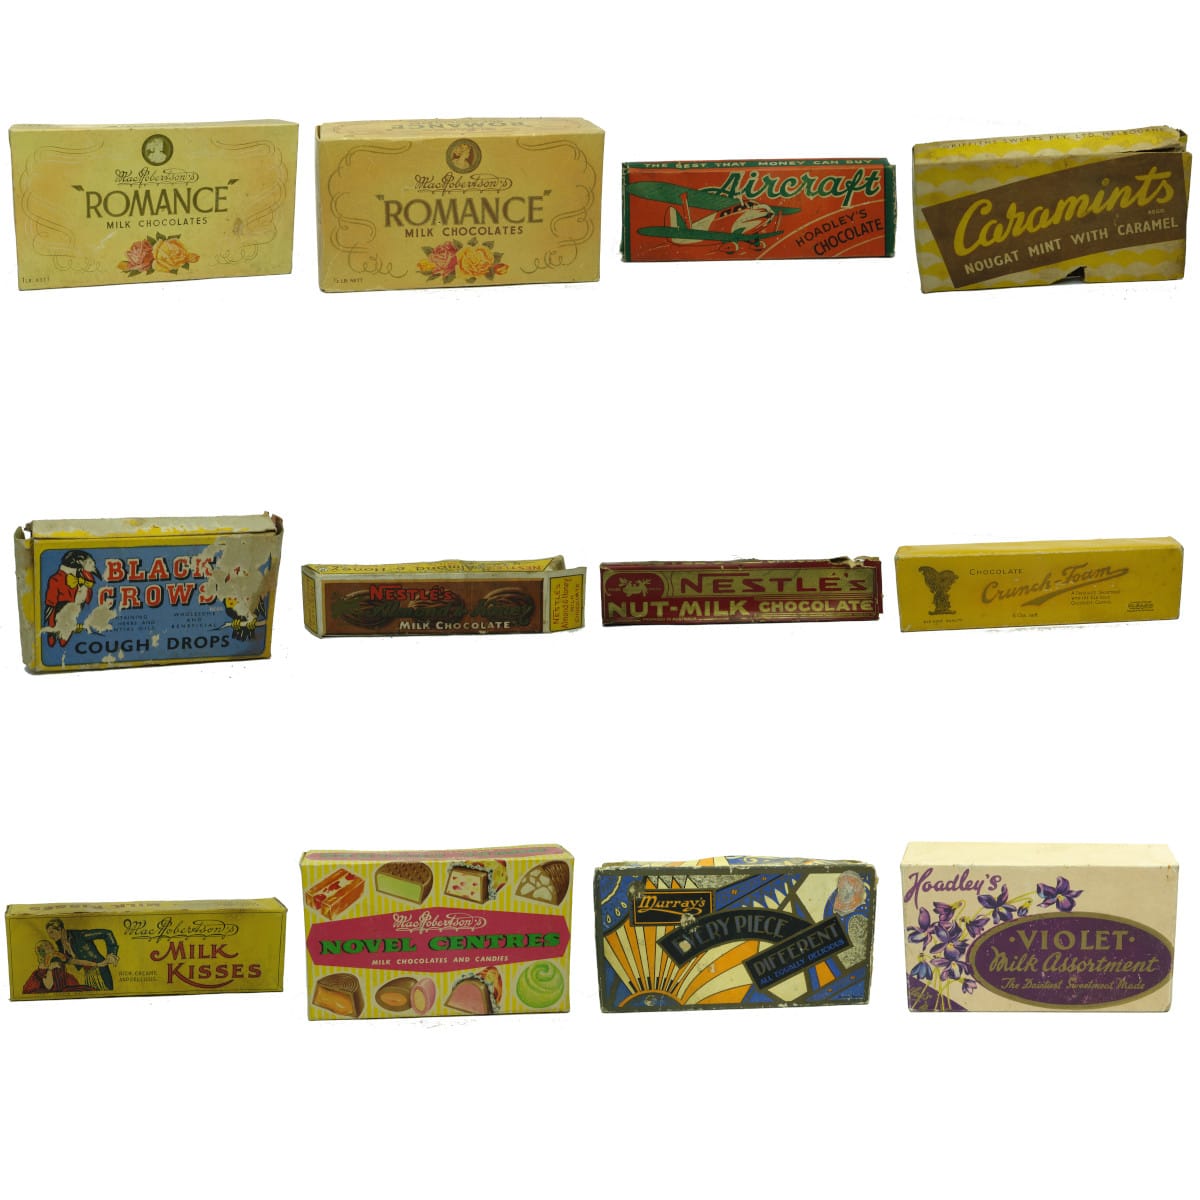 12 Cardboard Chocolates & Sweets Boxes: MacRobertson's; Hoadley's; Griffiths; Black Crows; Nestle's; Murray's.